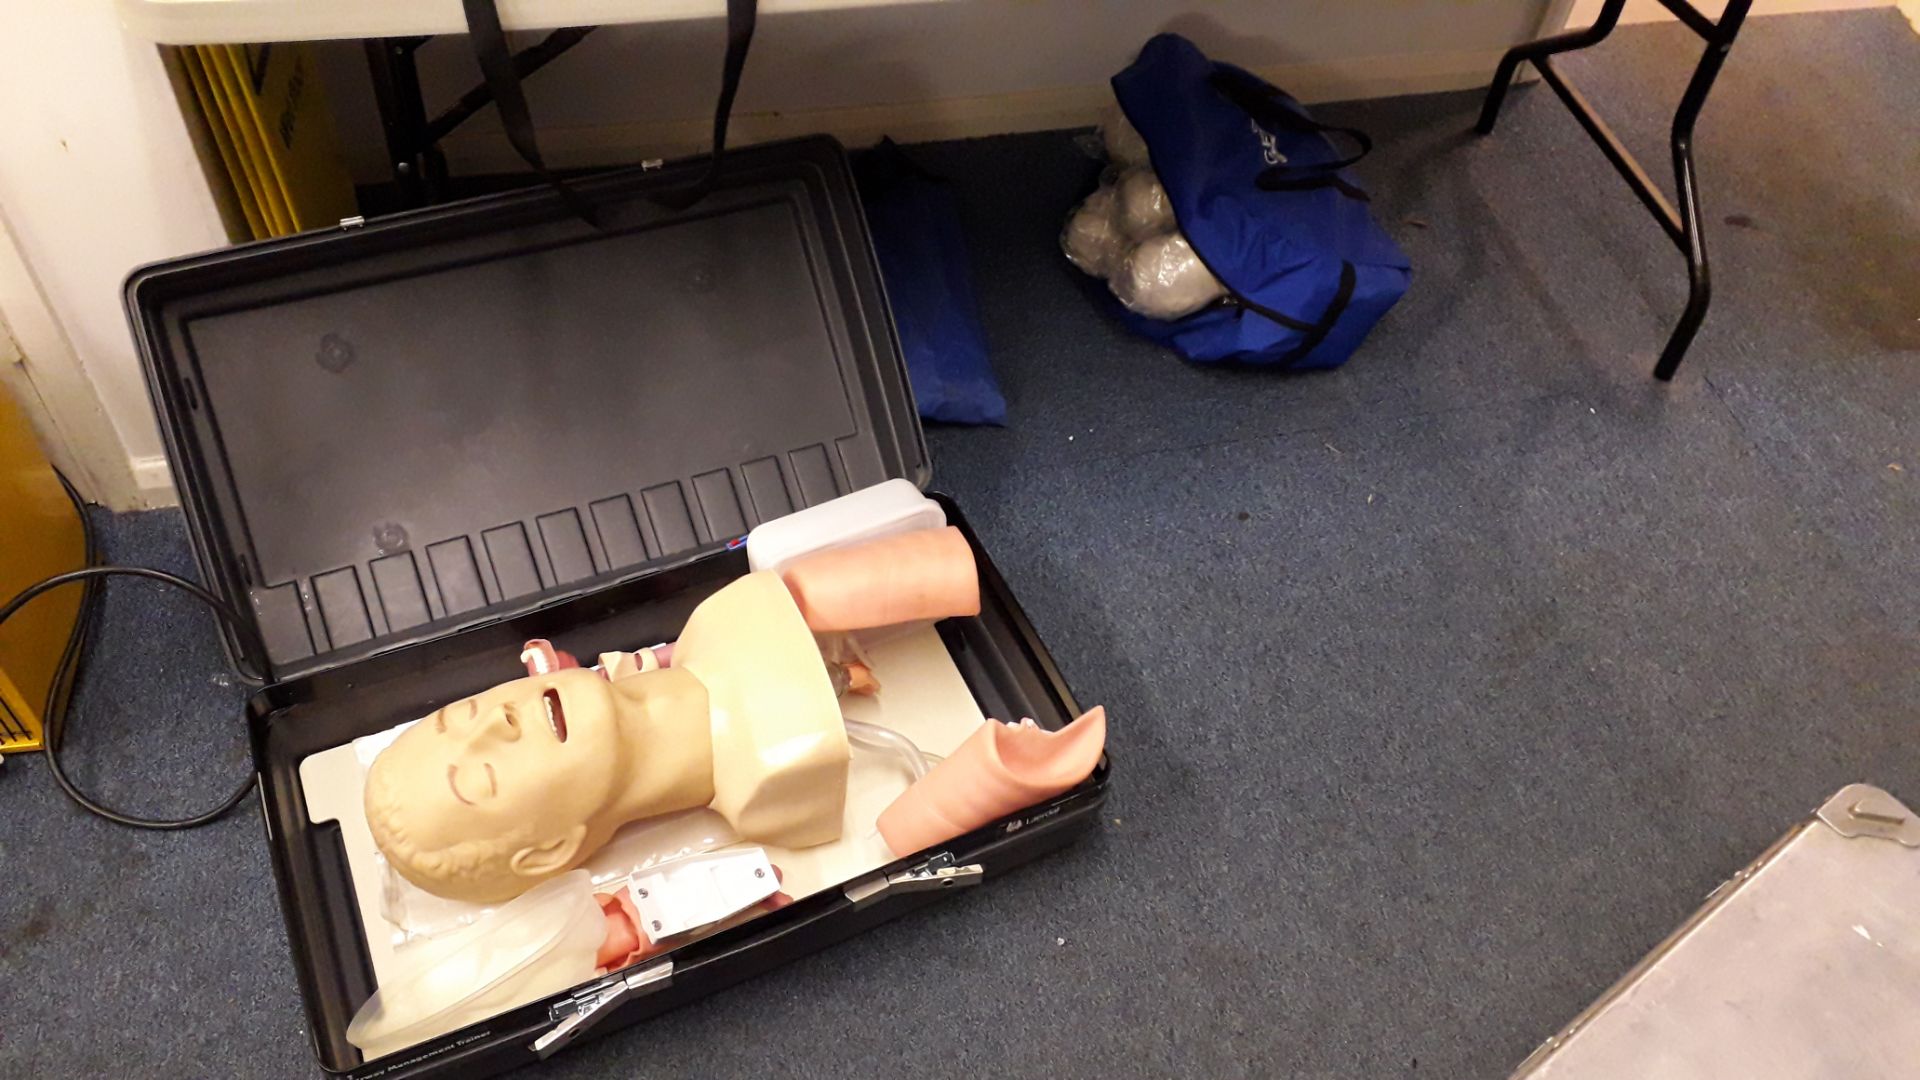 First Aid Training Equipment including Dummies, Me - Image 3 of 3